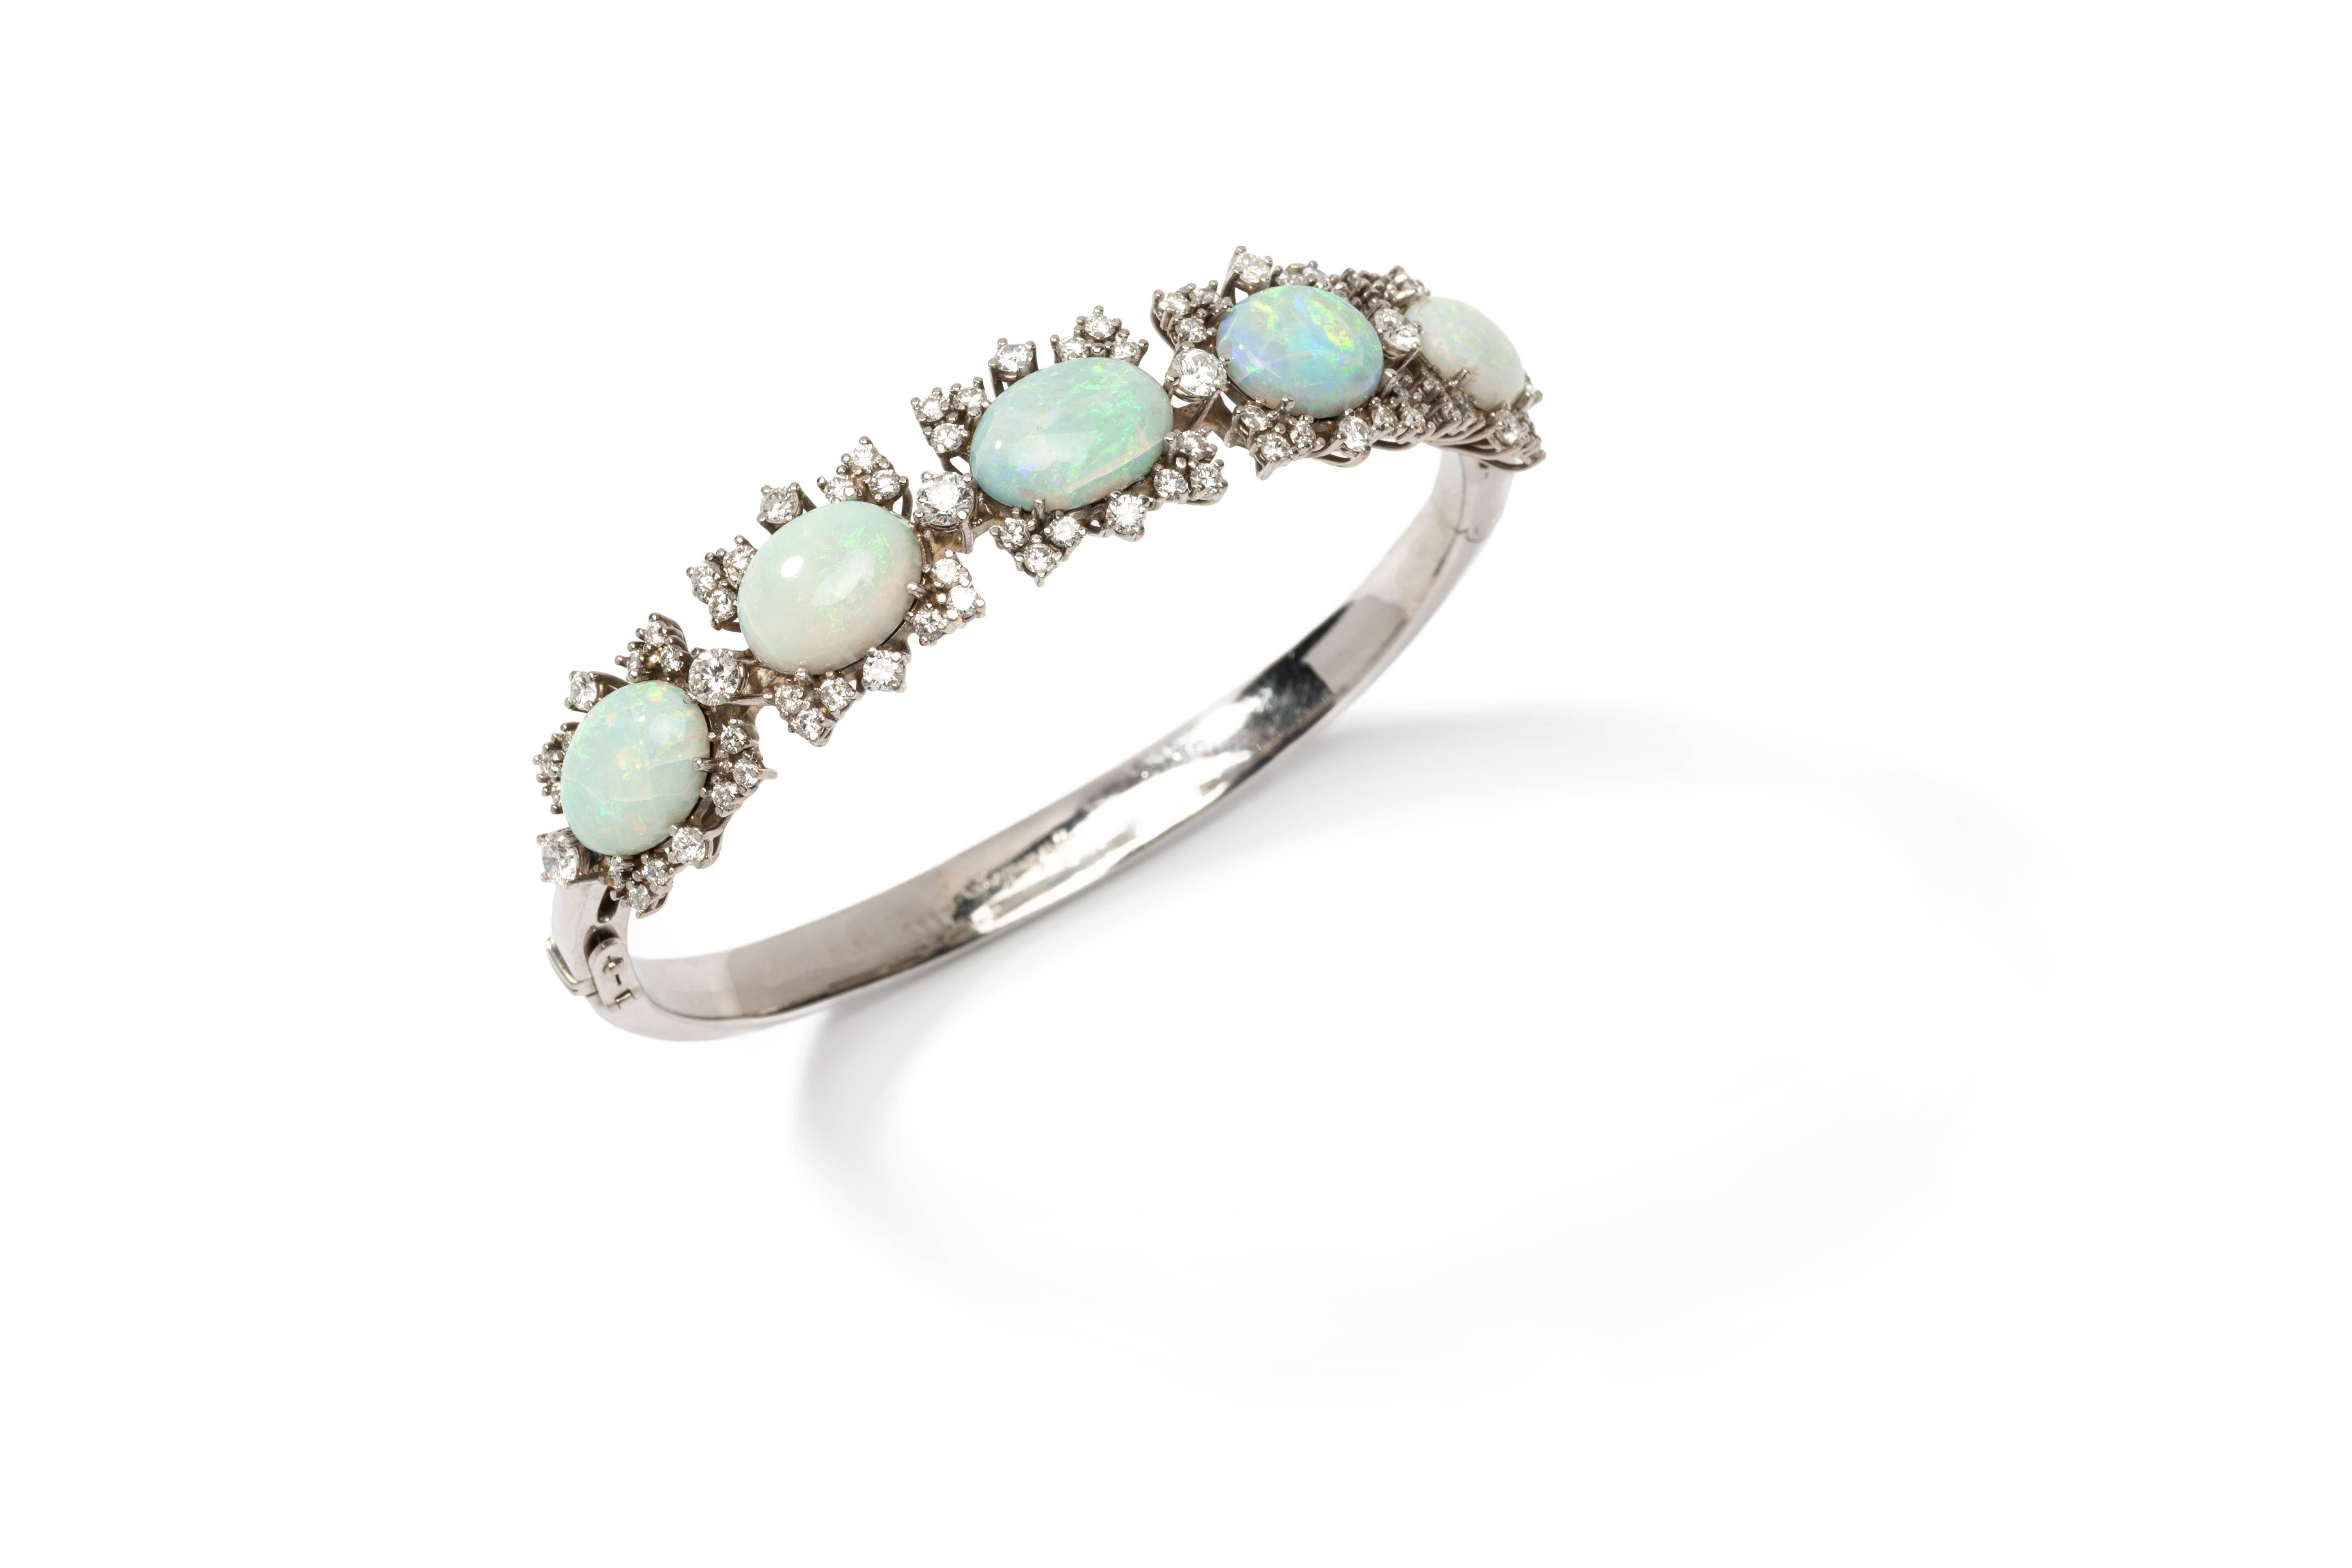 Fashionable jewelry creation by Jeweler Hohenberger. Oval bangle with elevated front. 5 opal cabochons weighing total circa 20,00 carats, surrounded by 76 brilliant-cut diamonds weighing ca. 3,36 ct., VS, wesselton. Mounted in 18 carat white gold.